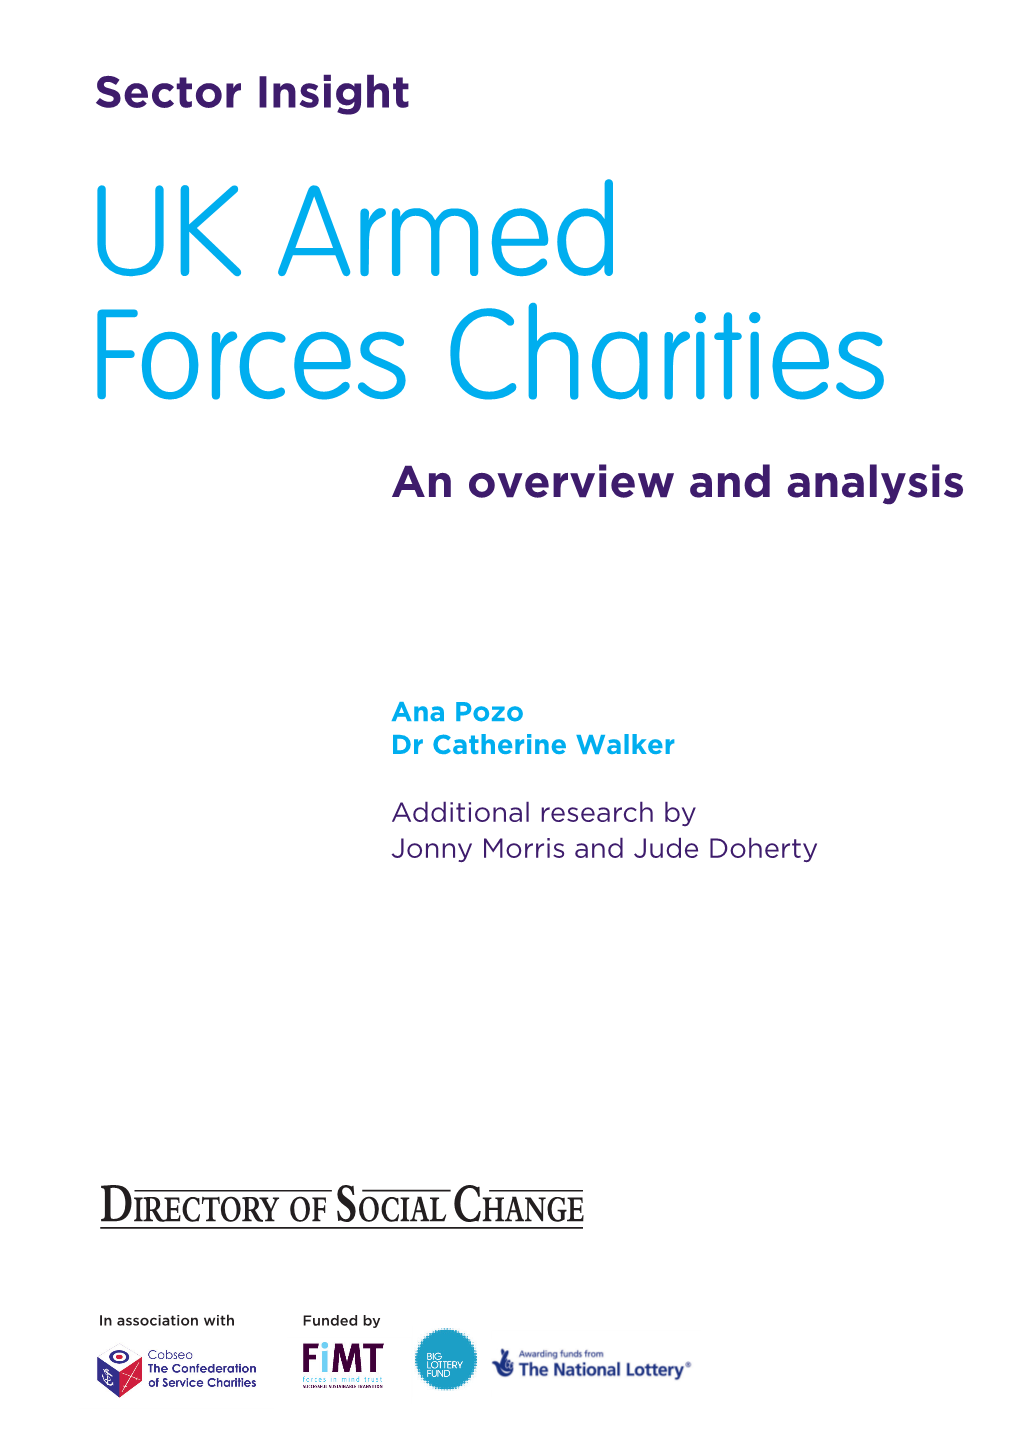 Sector Insight UK Armed Forces Charities